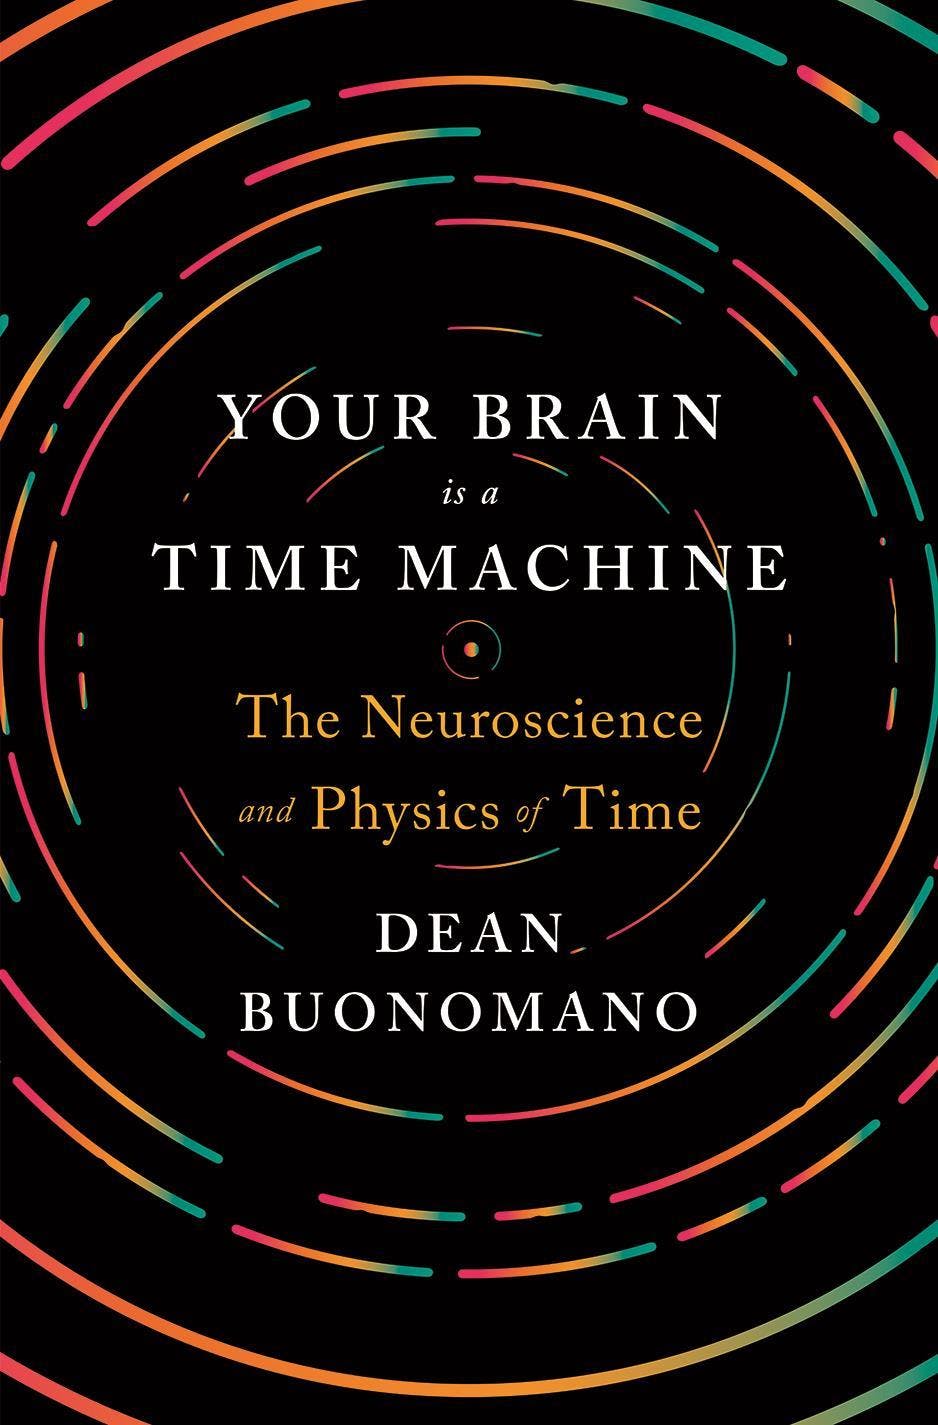 The media cover for “Your Brain Is a Time Machine” by Dean Buonomano